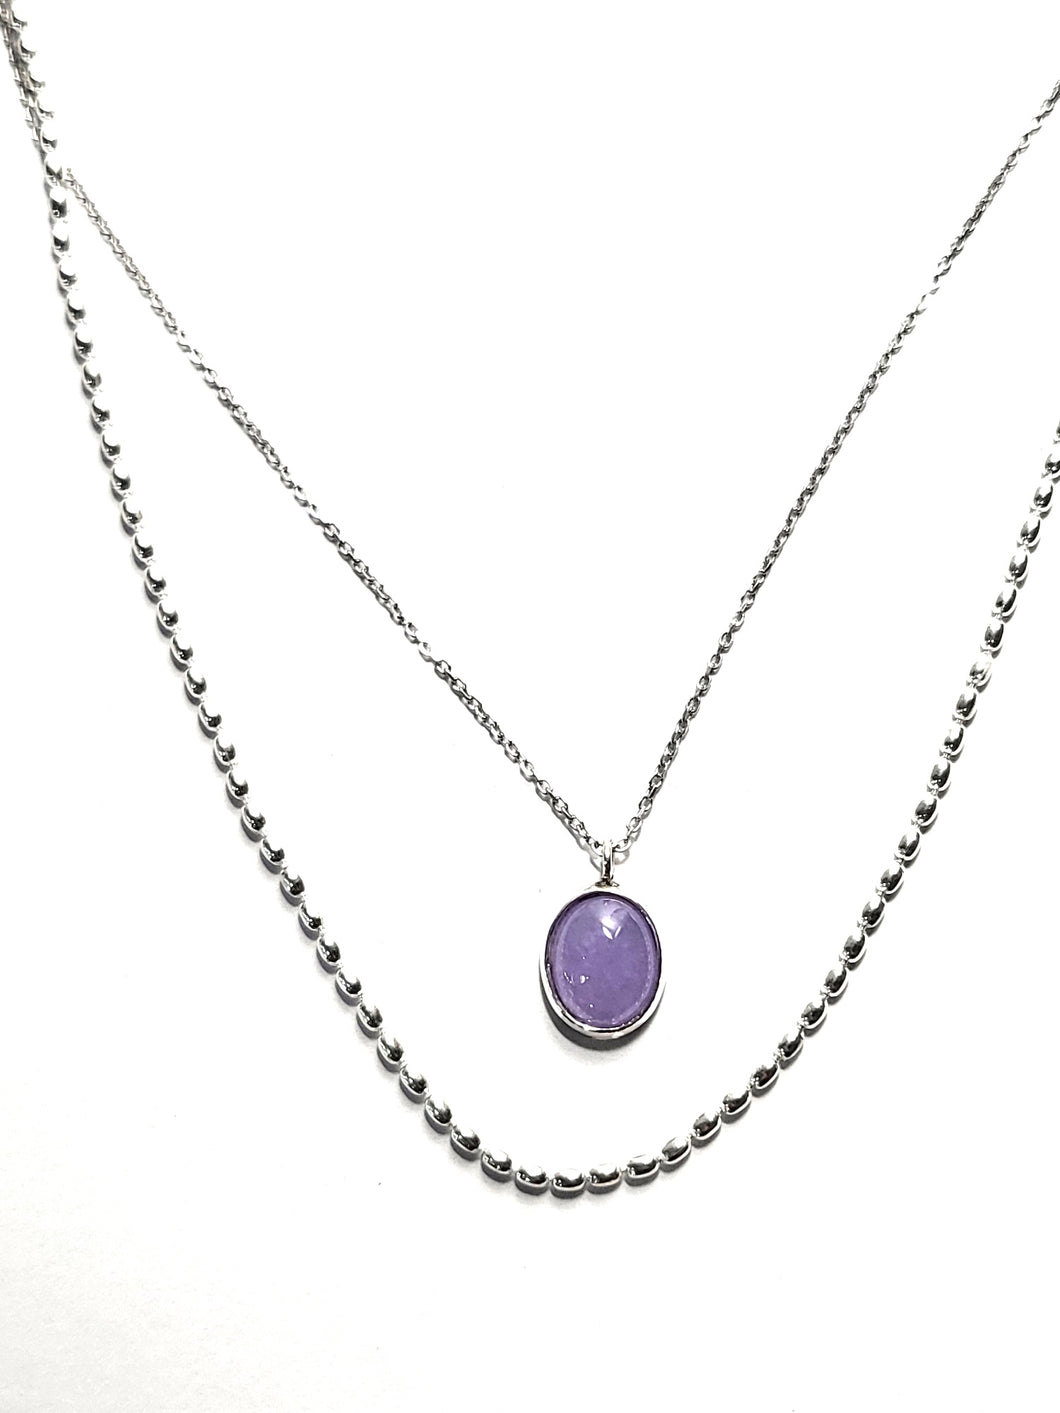 NEW A/T Lavender Jade Necklace